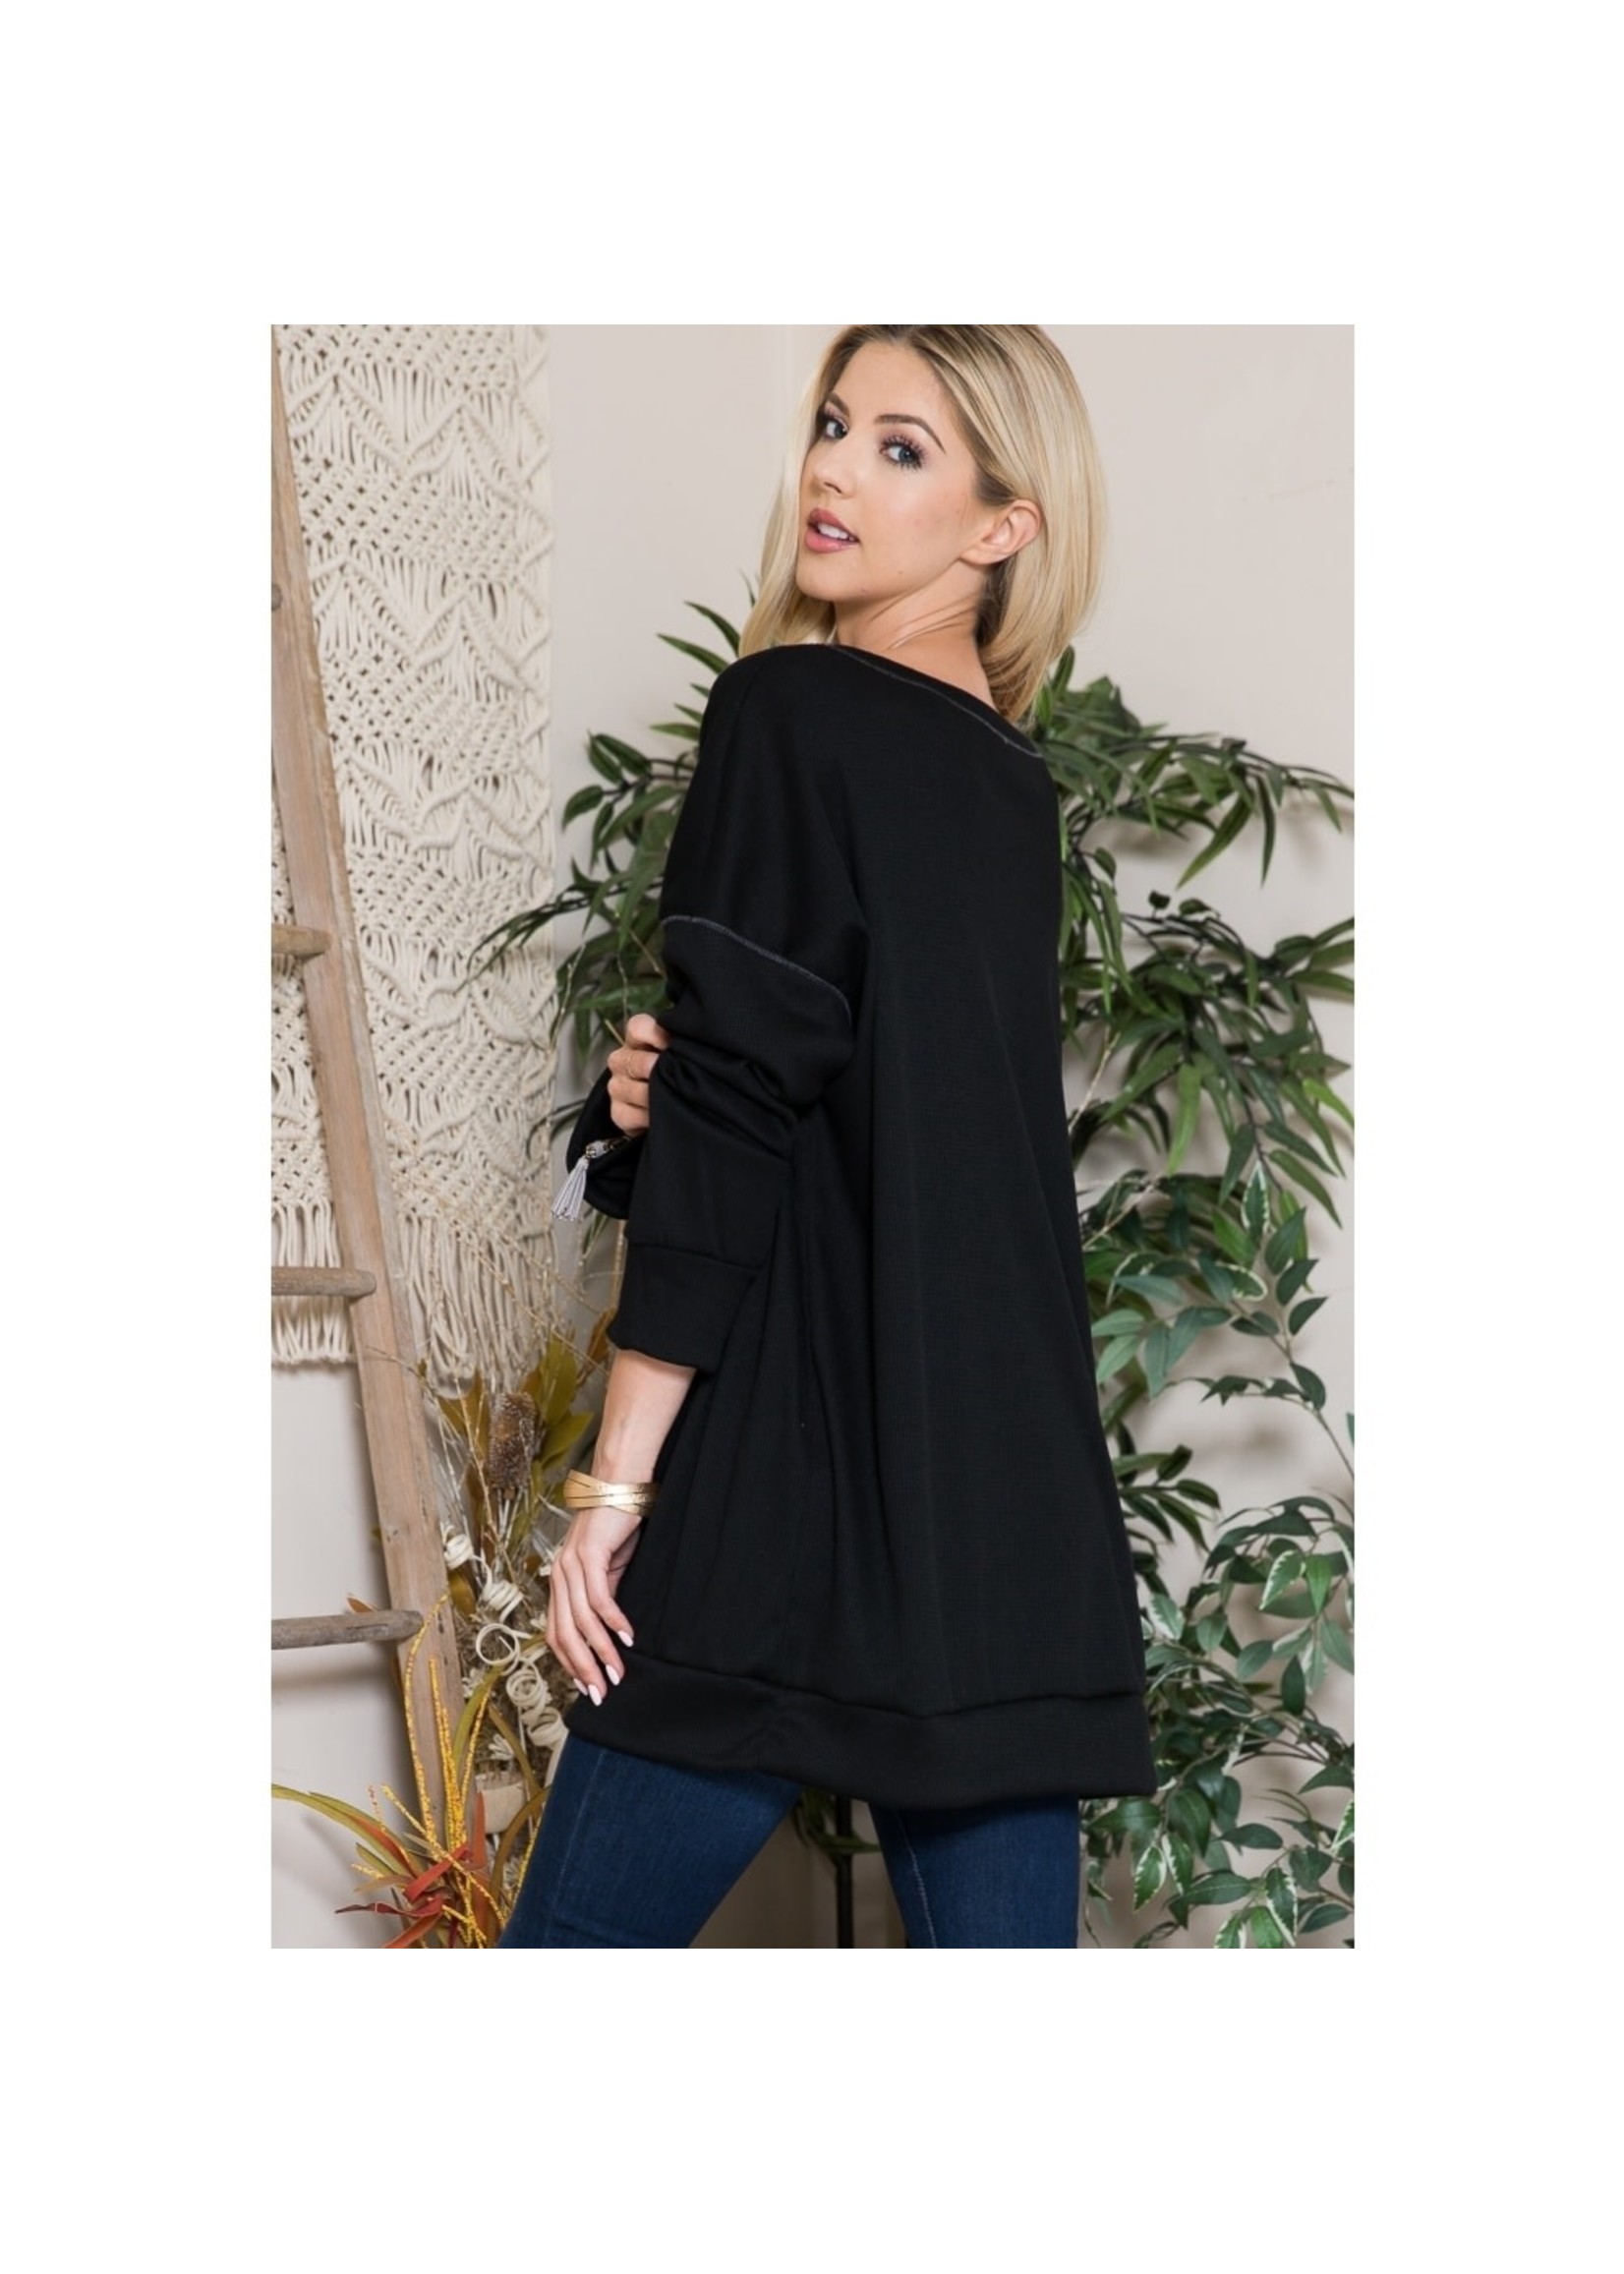 Celeste Clothiing Solid Oversized Tunic in 2 colors